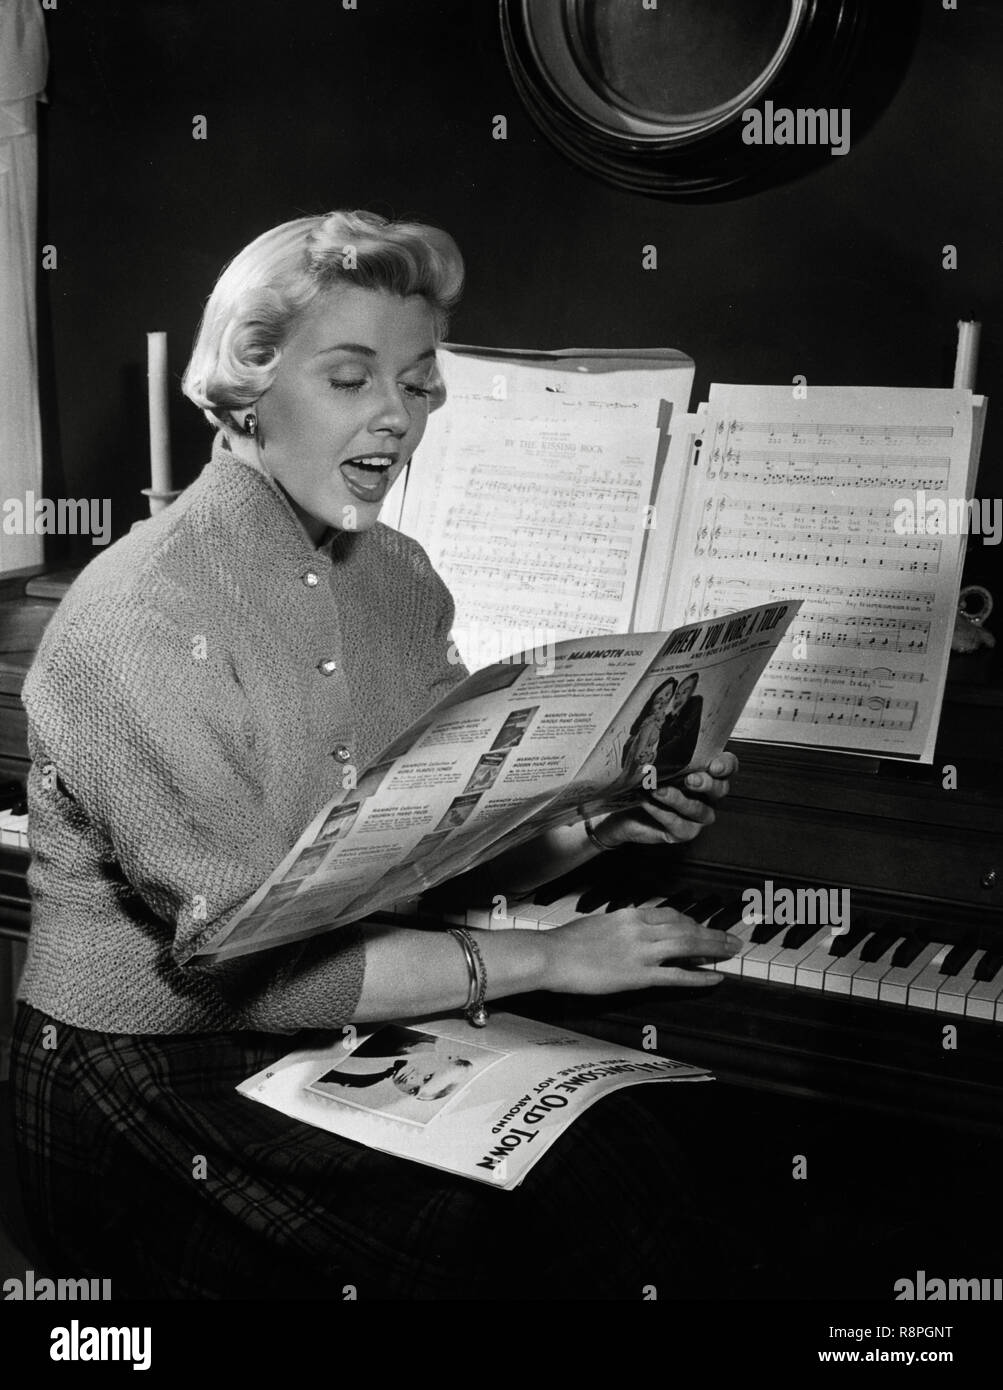 Doris Day, sits at a piano and reads music while singing,  circa 1952  File Reference # 33635 643THA Stock Photo